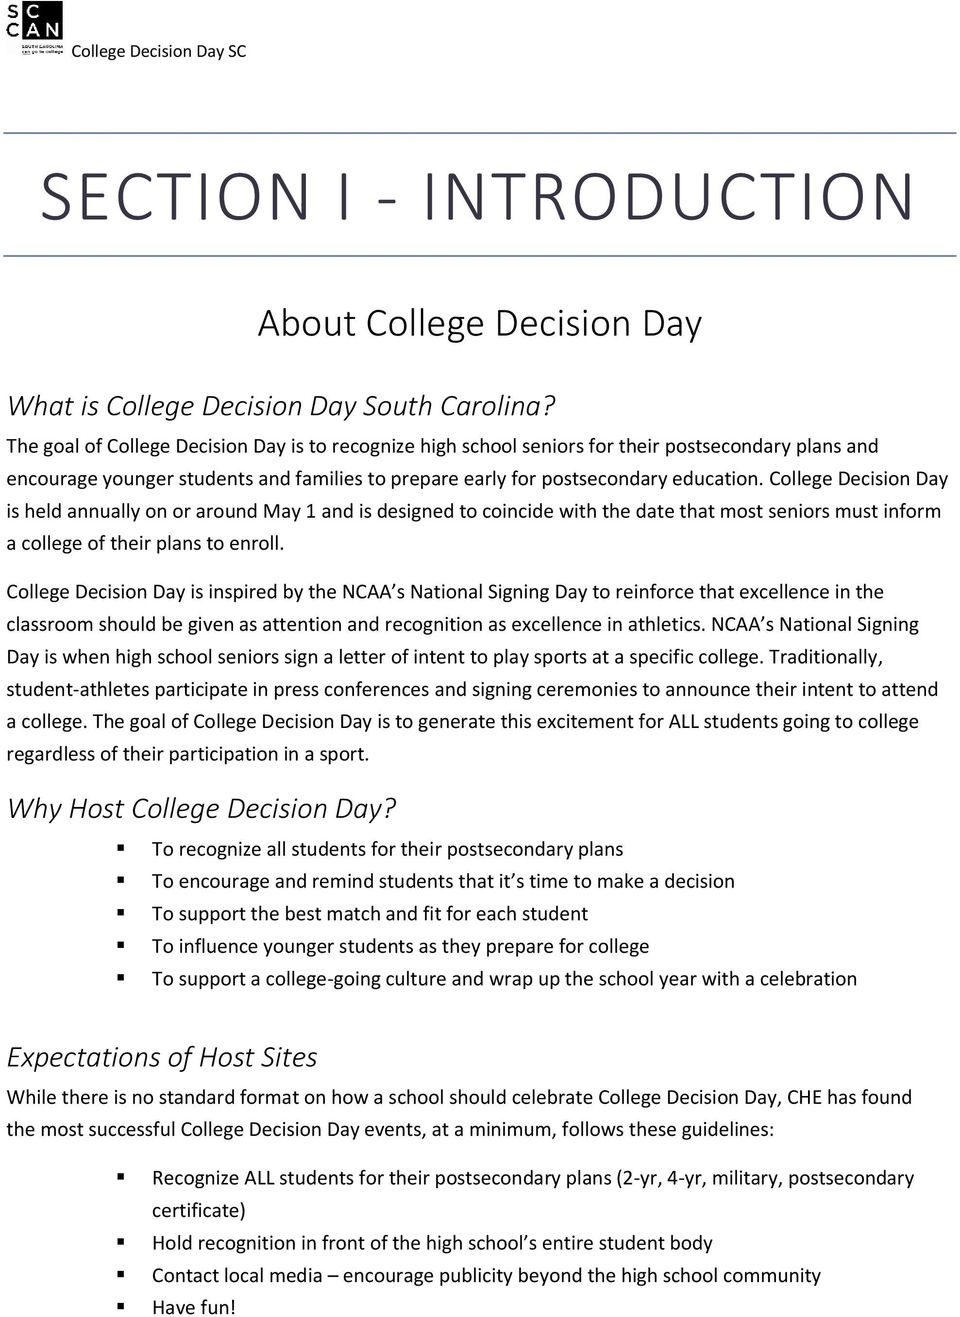 College Decision Day is held annually on or around May 1 and is designed to coincide with the date that most seniors must inform a college of their plans to enroll.